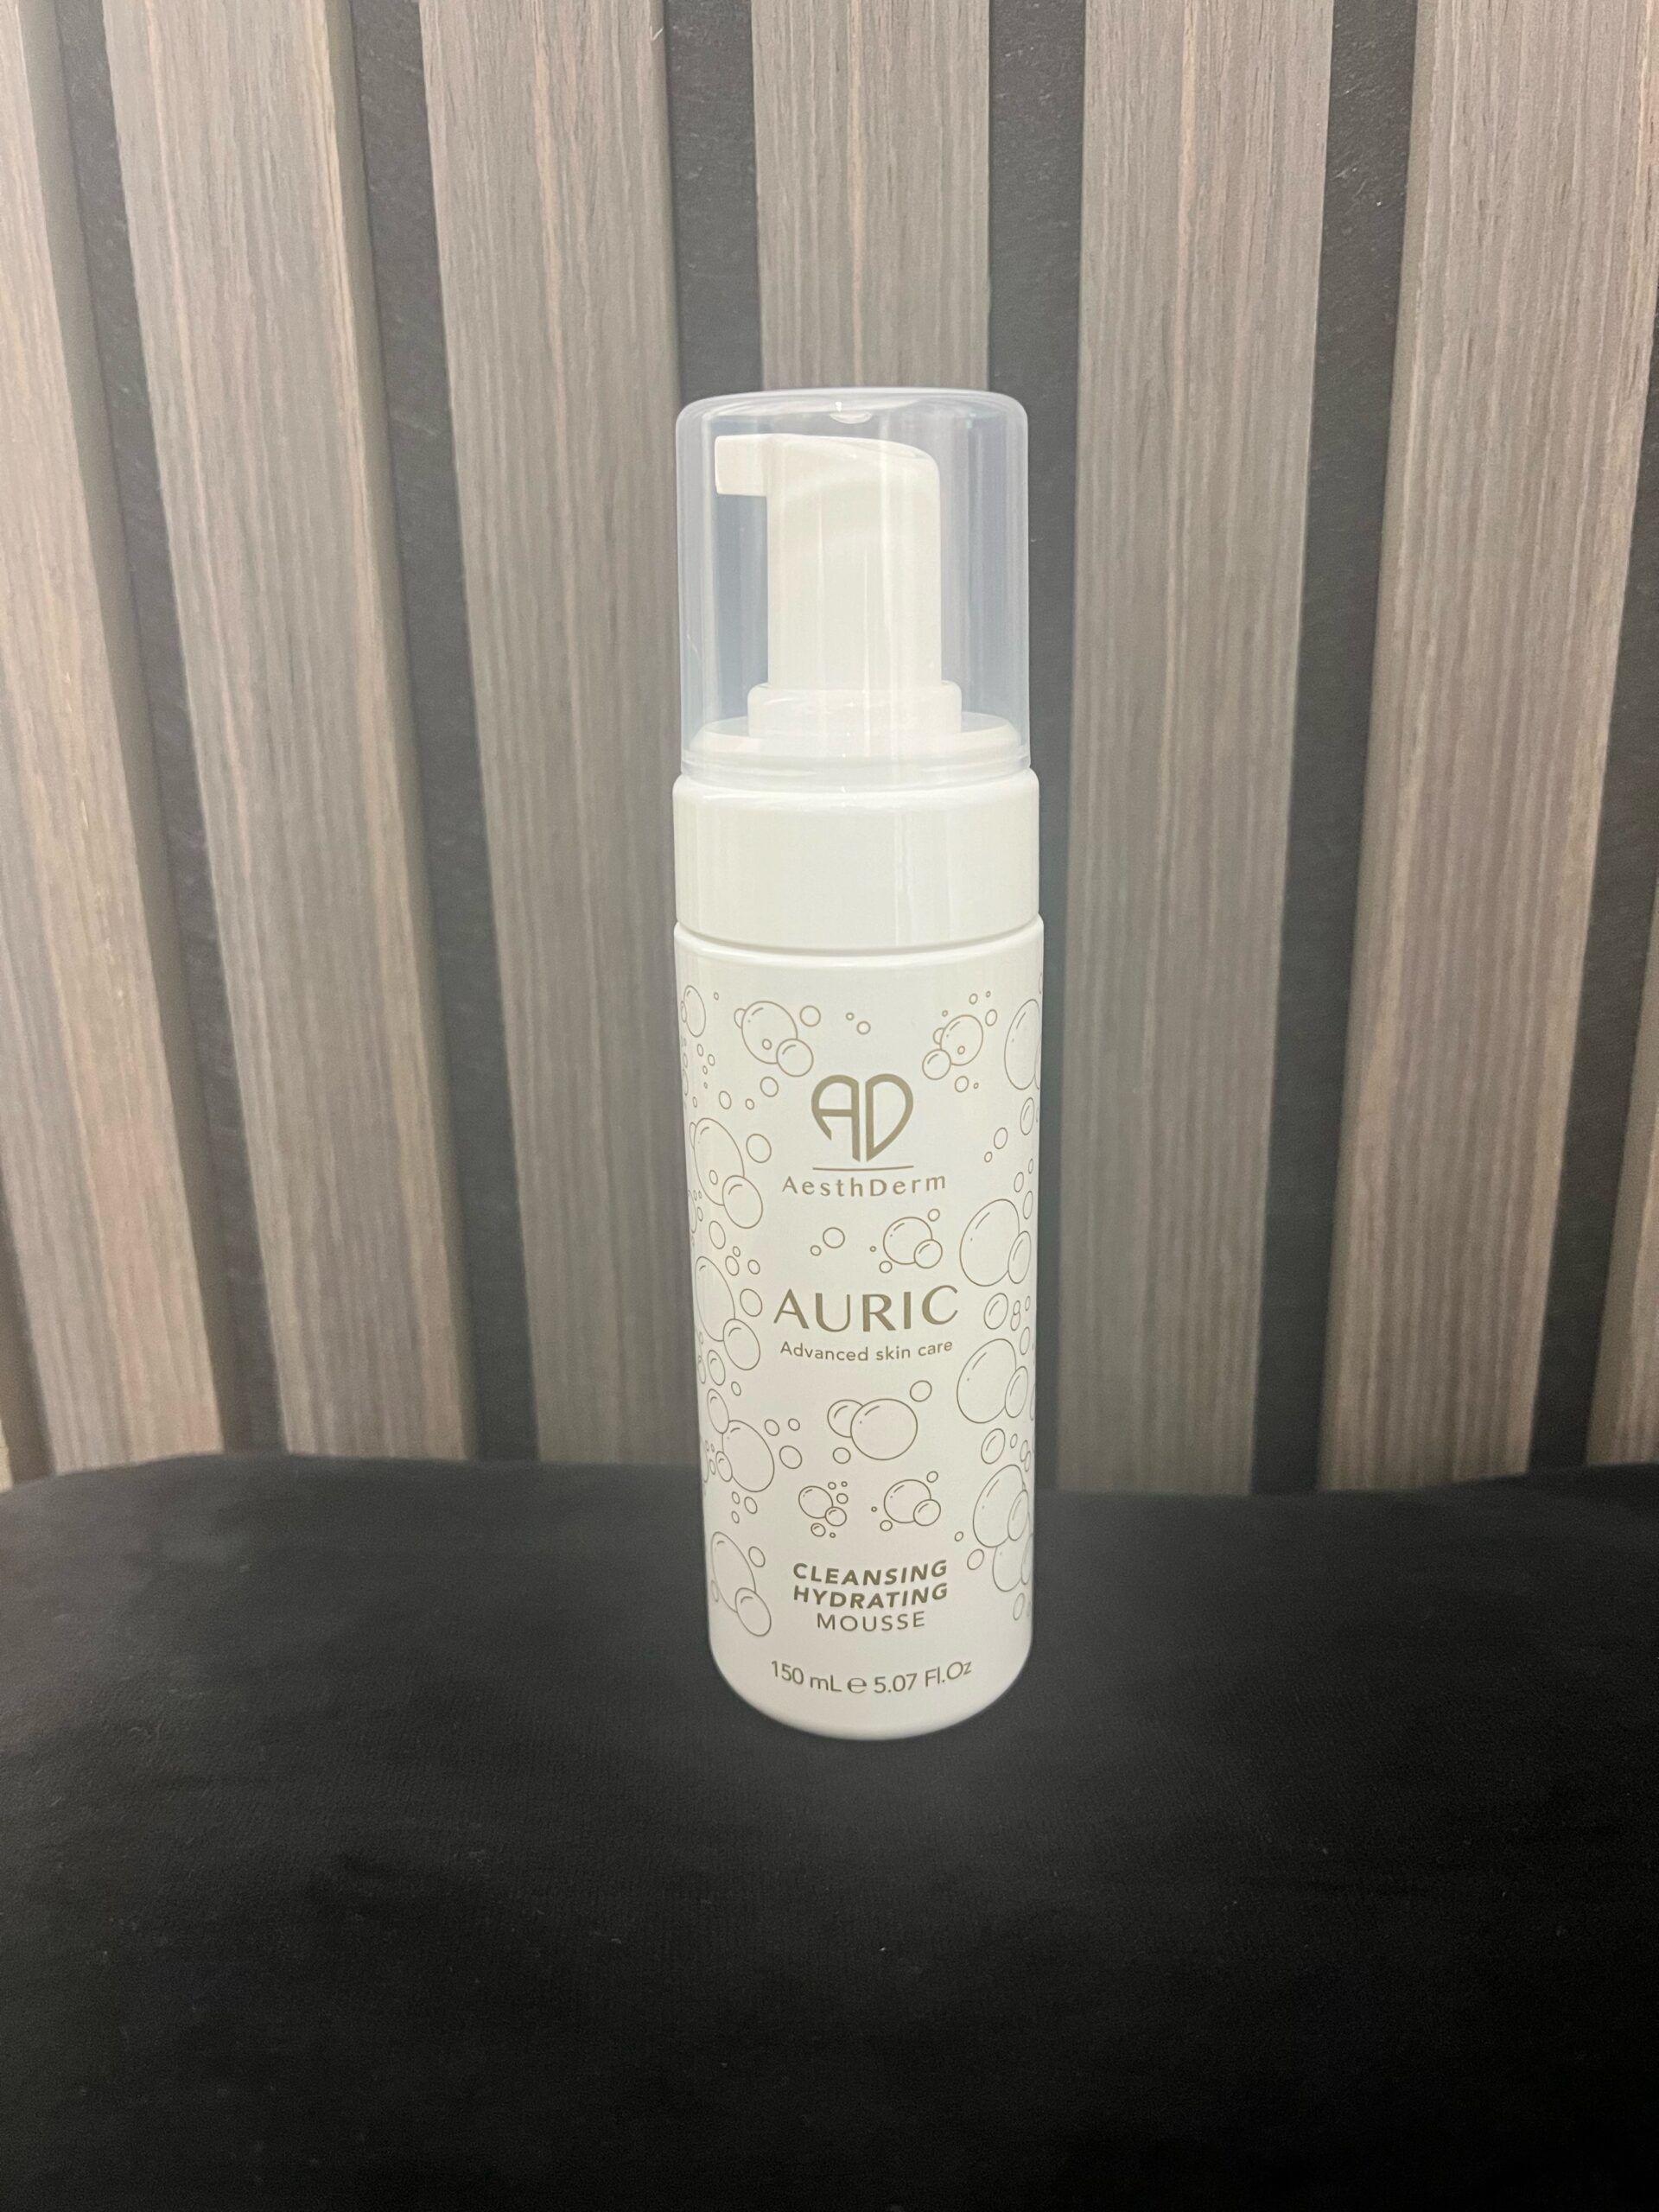 AURIC Advanced Skin Care Cleansing Hydrating Mousse 150ml